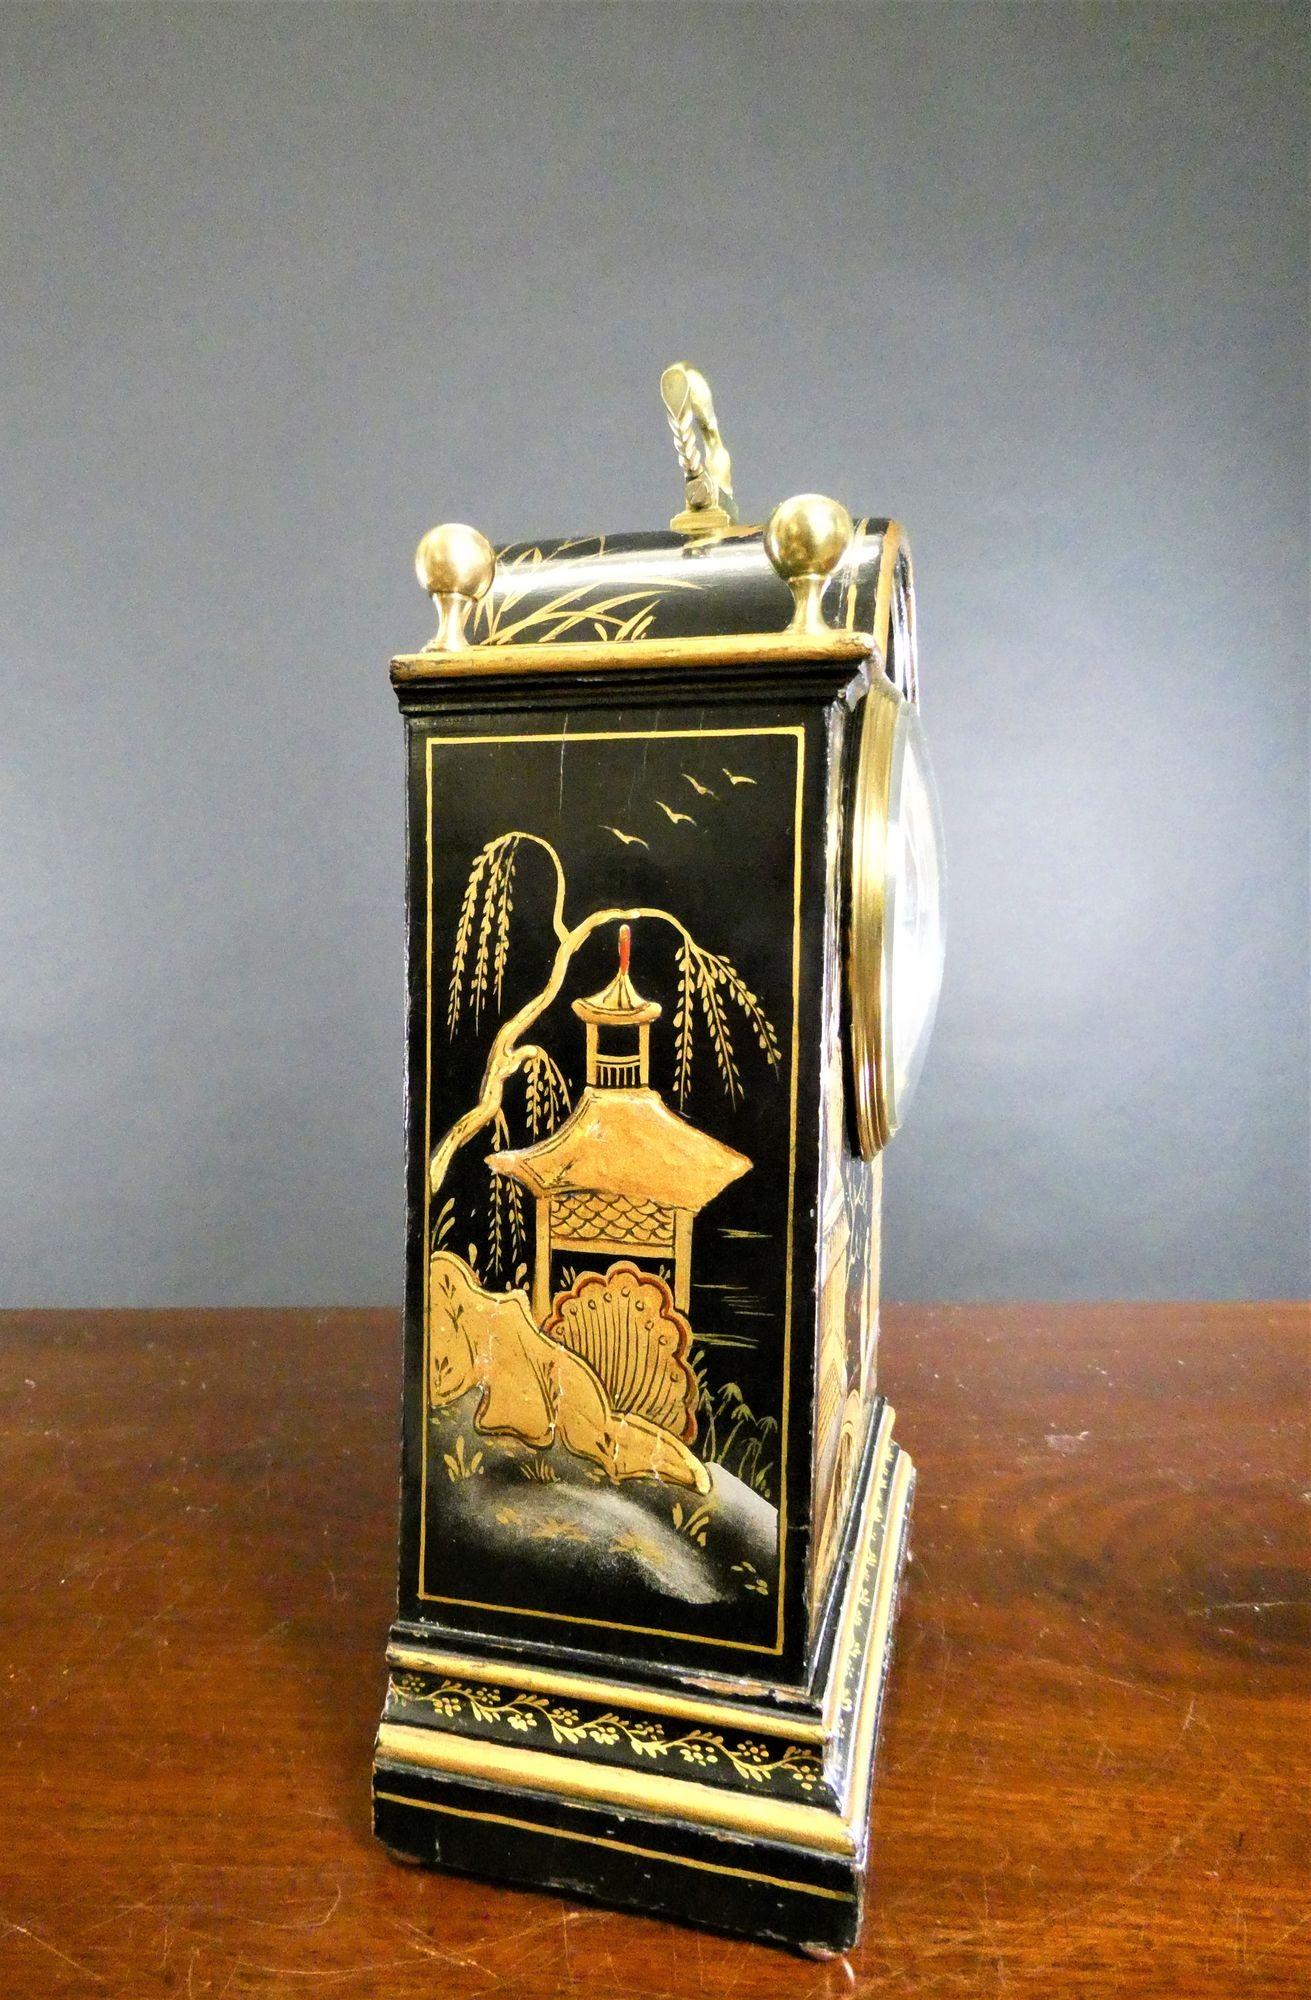 Edwardian Chinoiserie Decorated Mantel Clock, John Bagshaw & Sons, Liverpool
Break arch case with raised chinoiserie scenes on an ebonised ground, four brass finials and decorated carrying hinged handle, raised stepped plinth resting on four brass